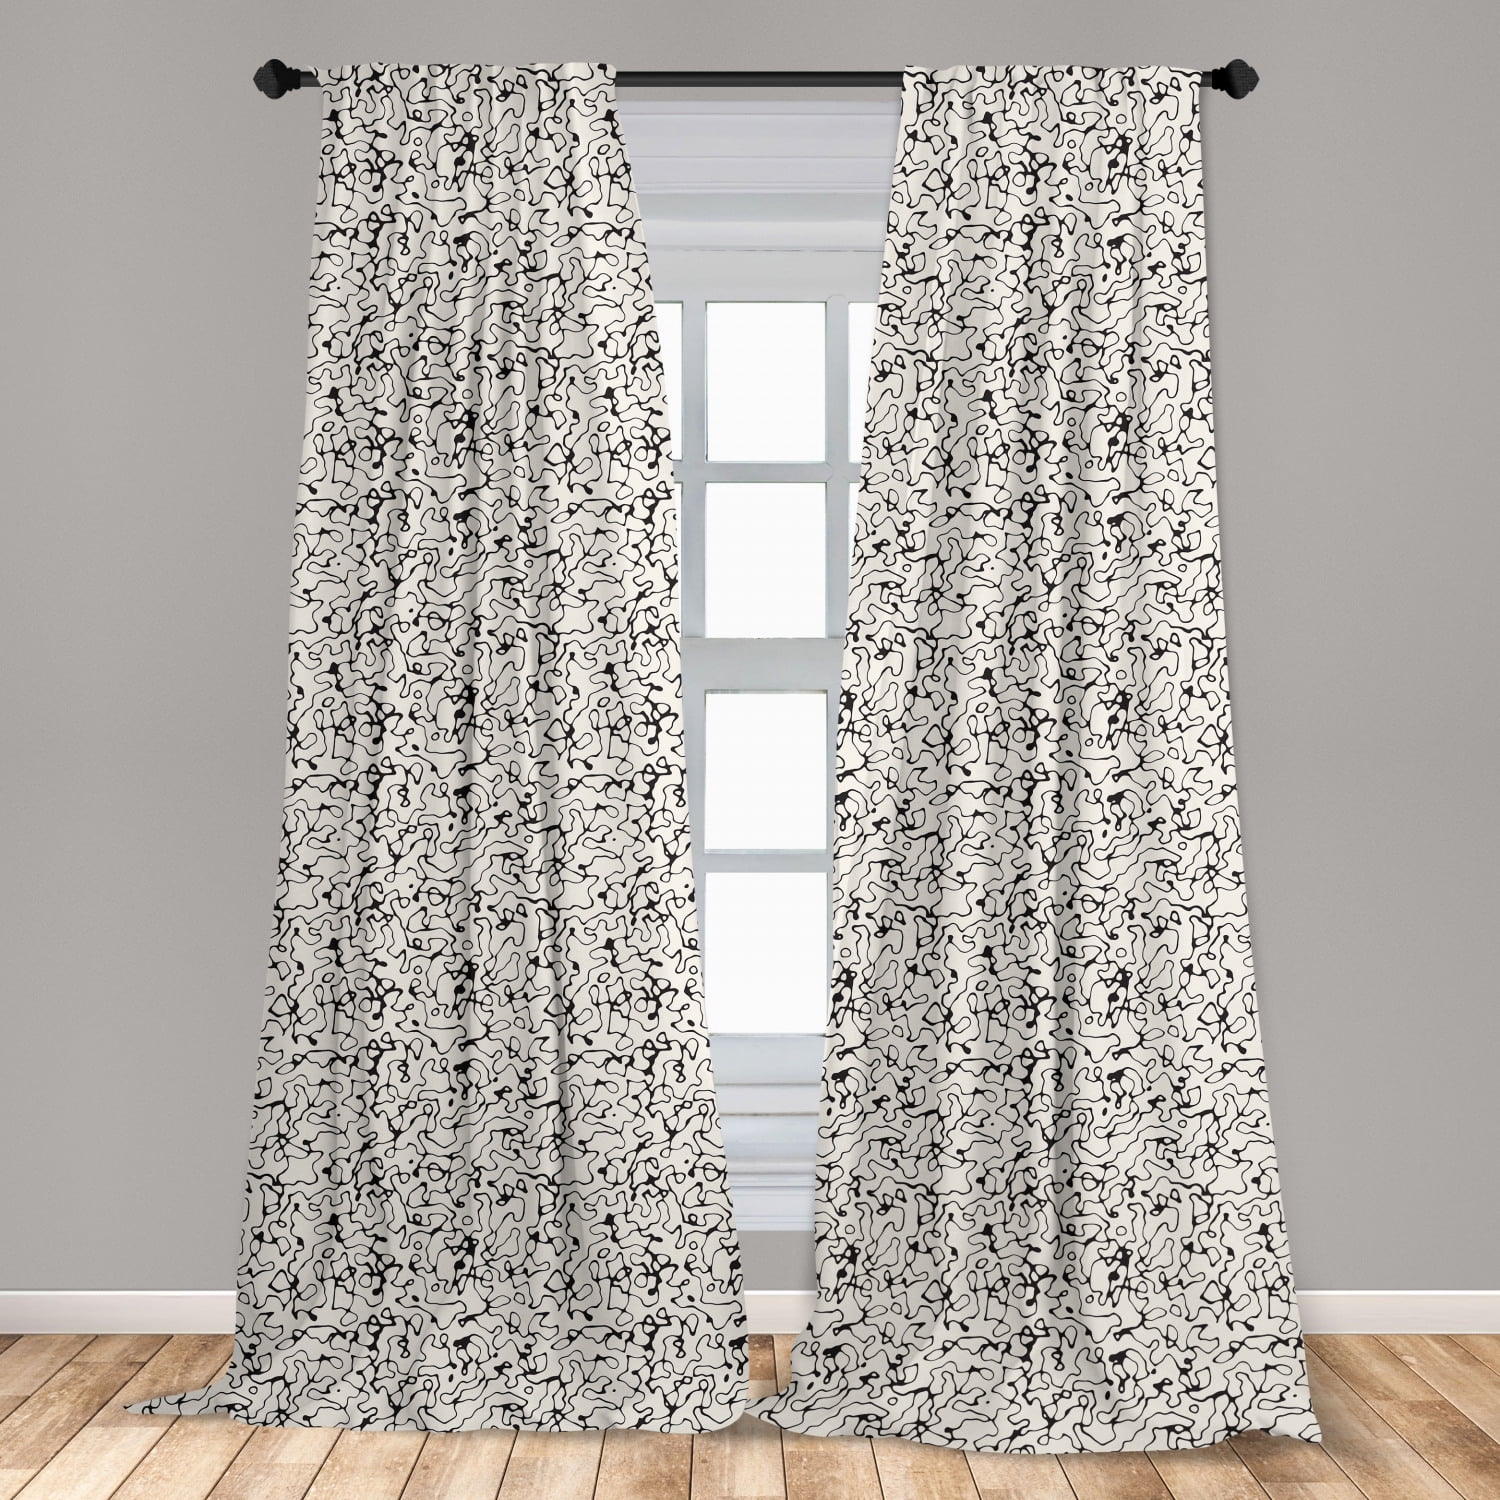 Leaf Curtains 20 Panels Set, Black and White Pattern with Swirled Skinny  Branches with Leaves Old Fashioned Scroll, Window Drapes for Living Room ...